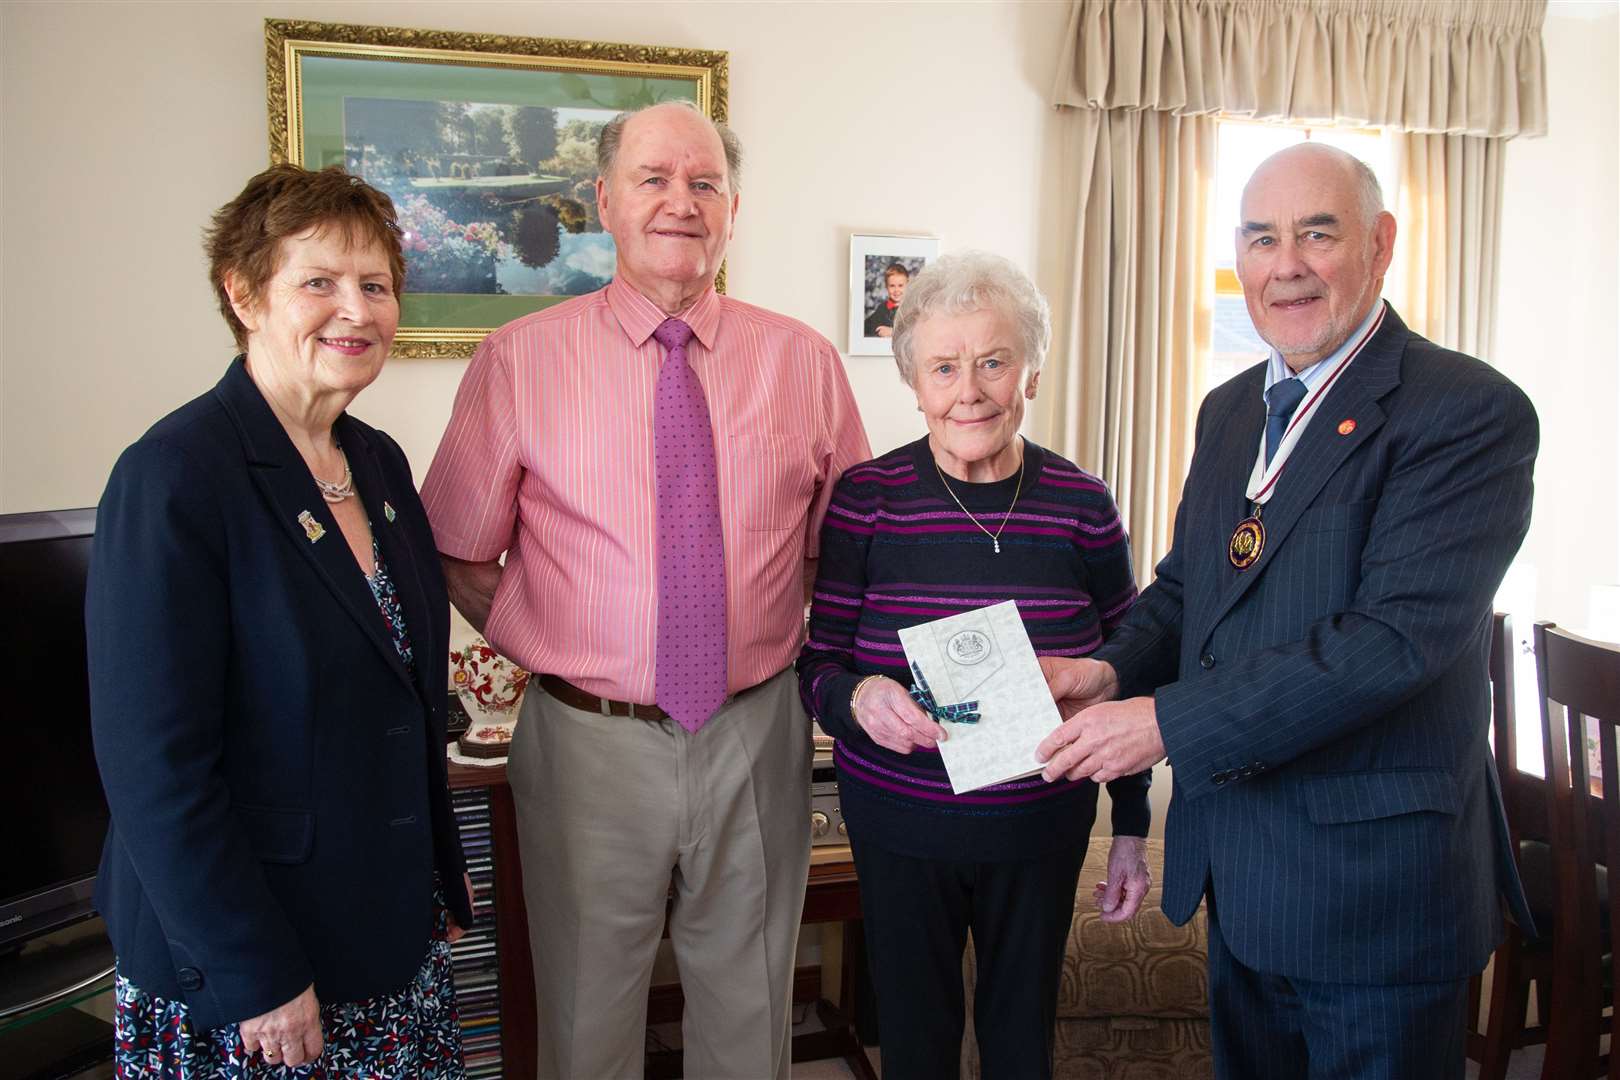 Ian and Isobel are joined by George Macintyre, Depute Lord Lieutenant and Lorna Creswell, local Forres Councillor...Ian and Isobel Christie, orginally from Brora, celebrate 60 years of married life at the house in Forres. ..Picture: Daniel Forsyth..